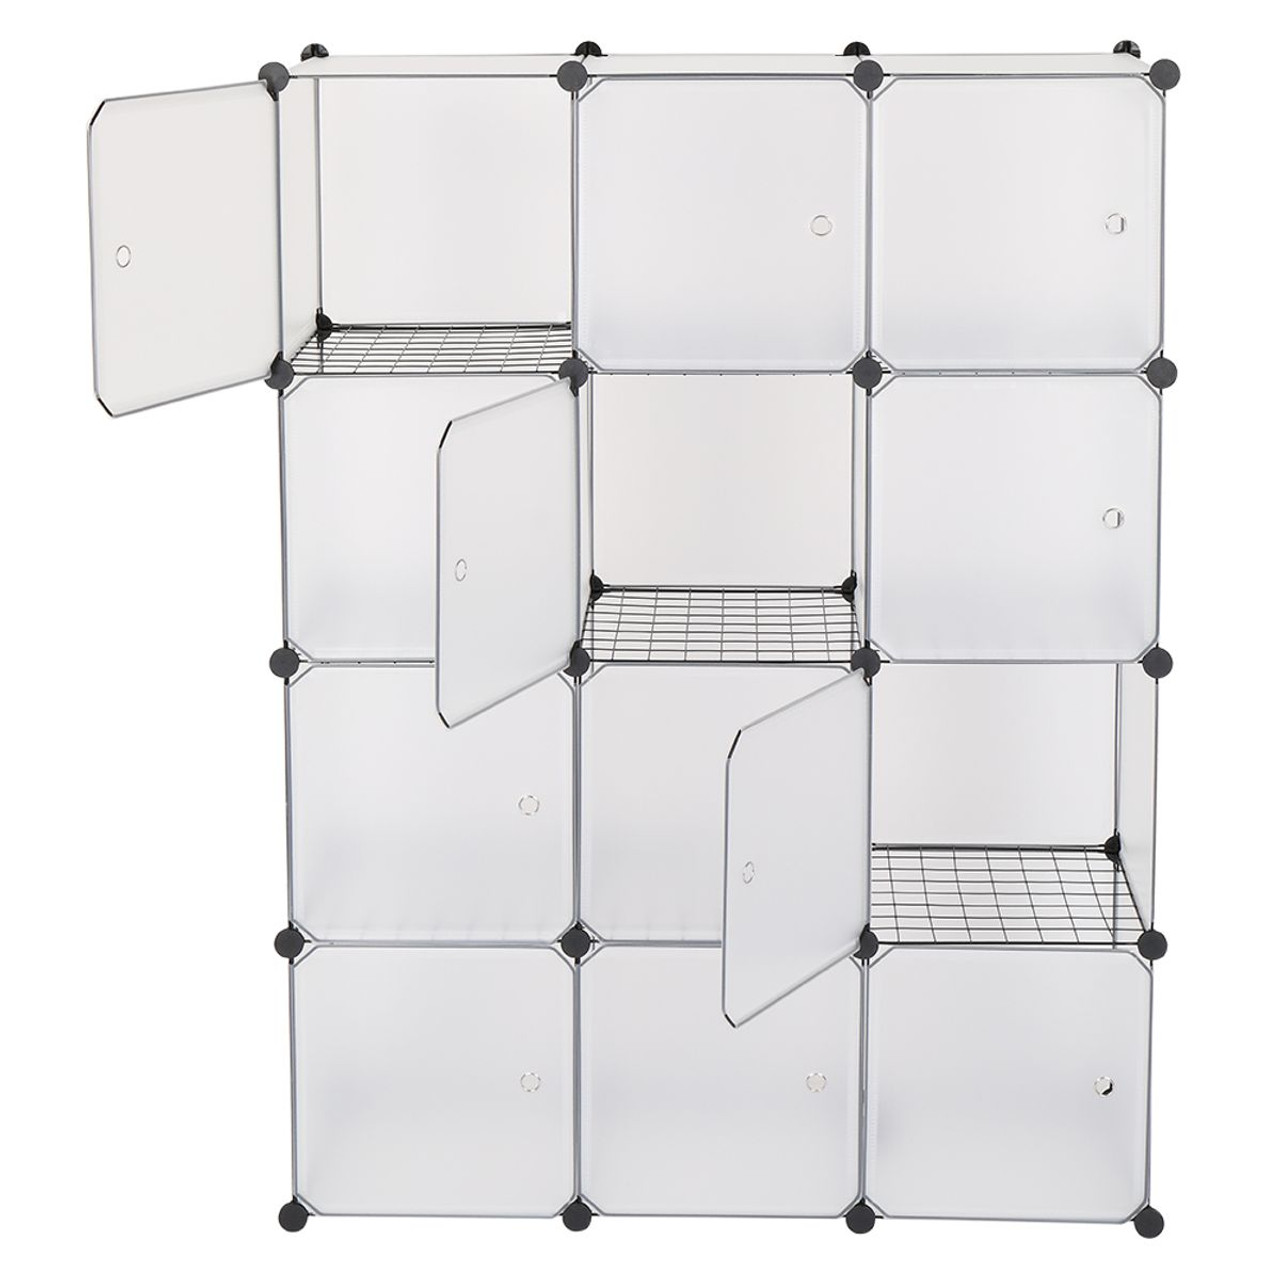 14 x 14-Inch Cube Storage Organizers (Set of 12) product image